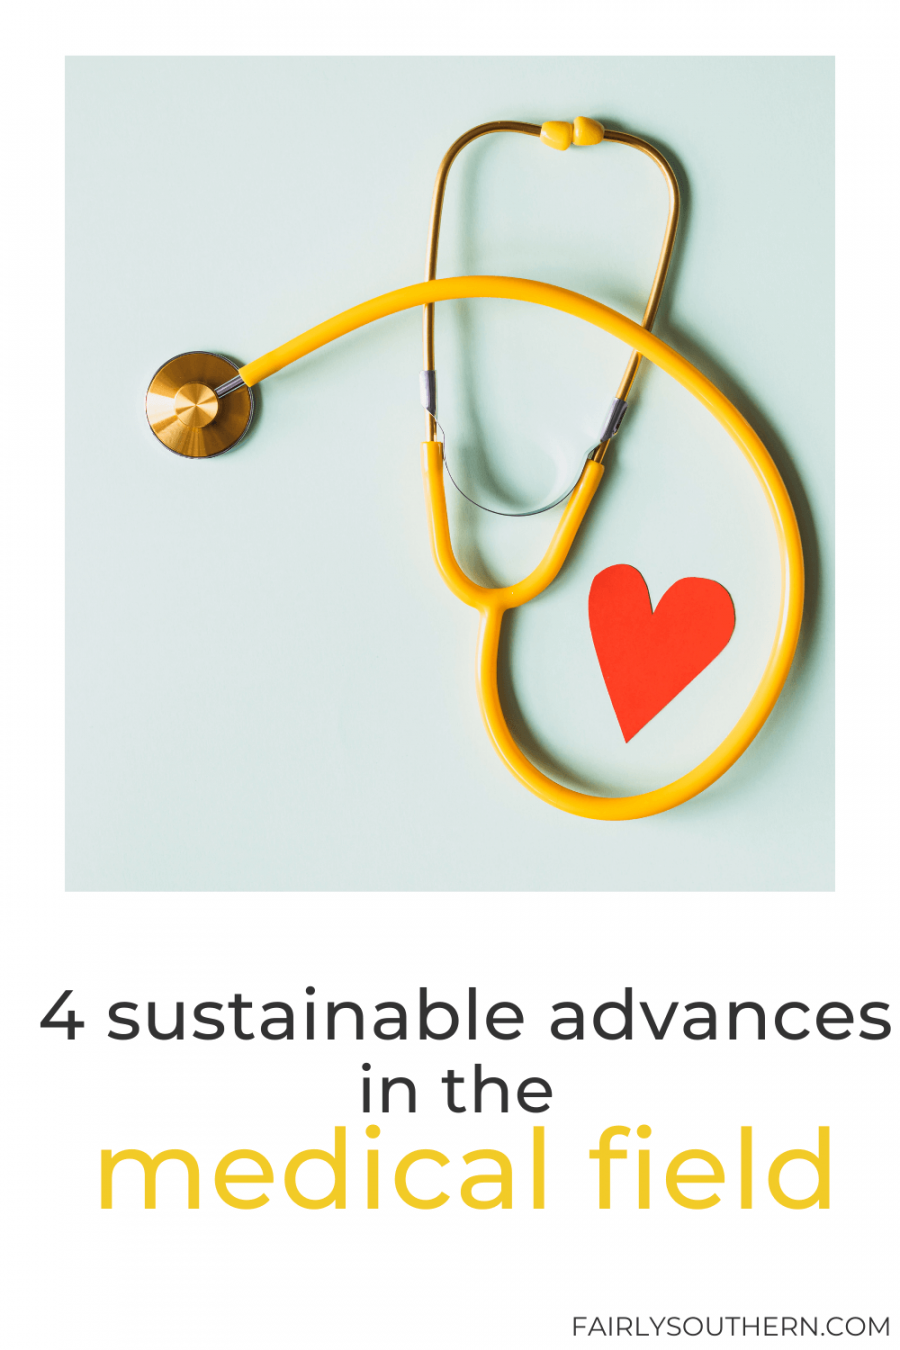 4 Sustainable Advances in the Medical Field